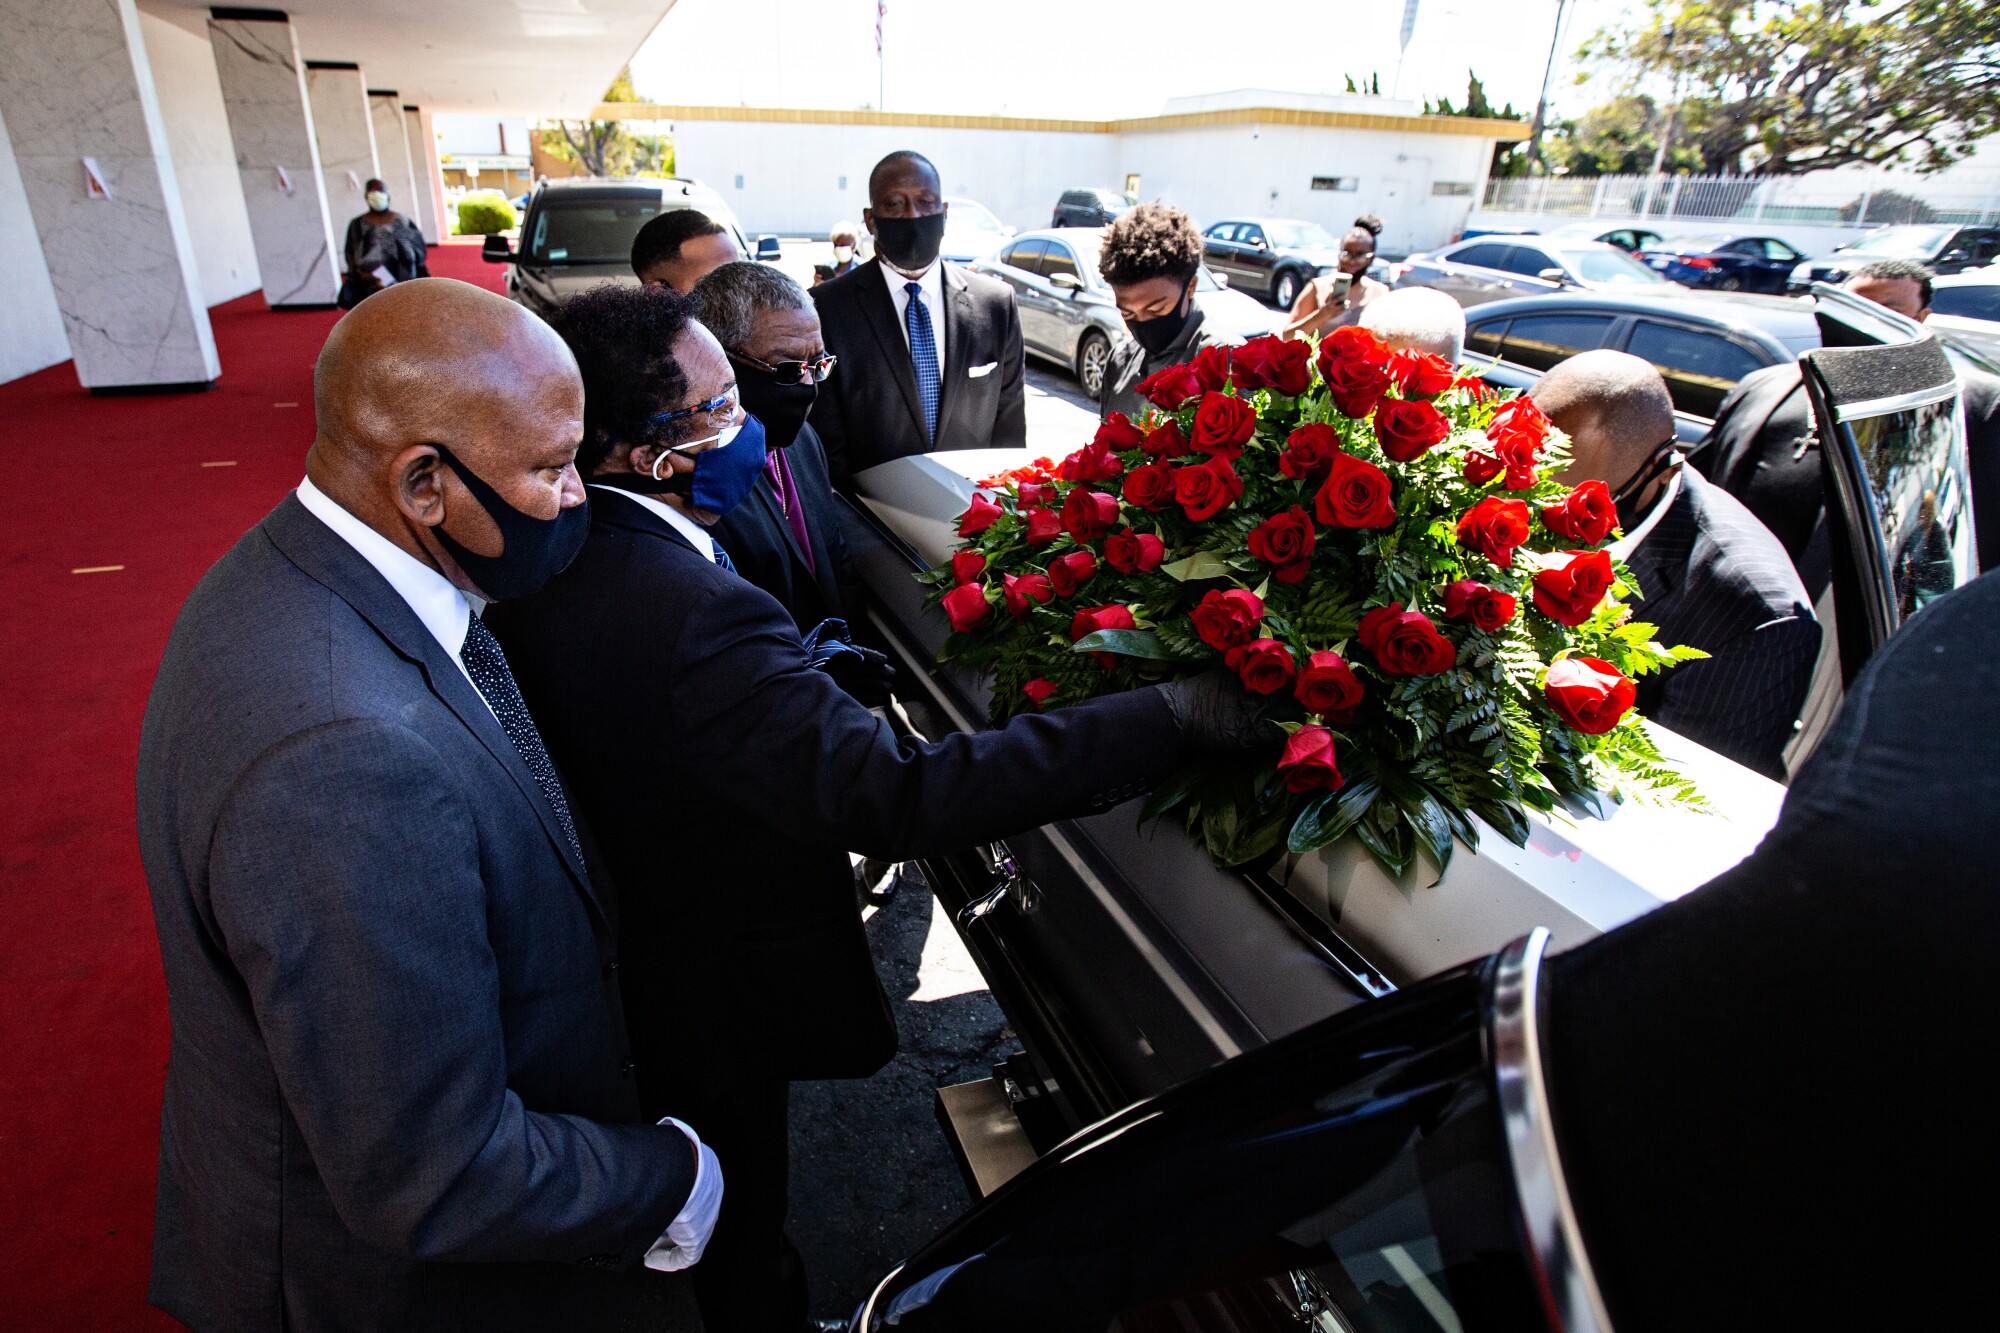 Family members load a casket topped with roses into a hearse